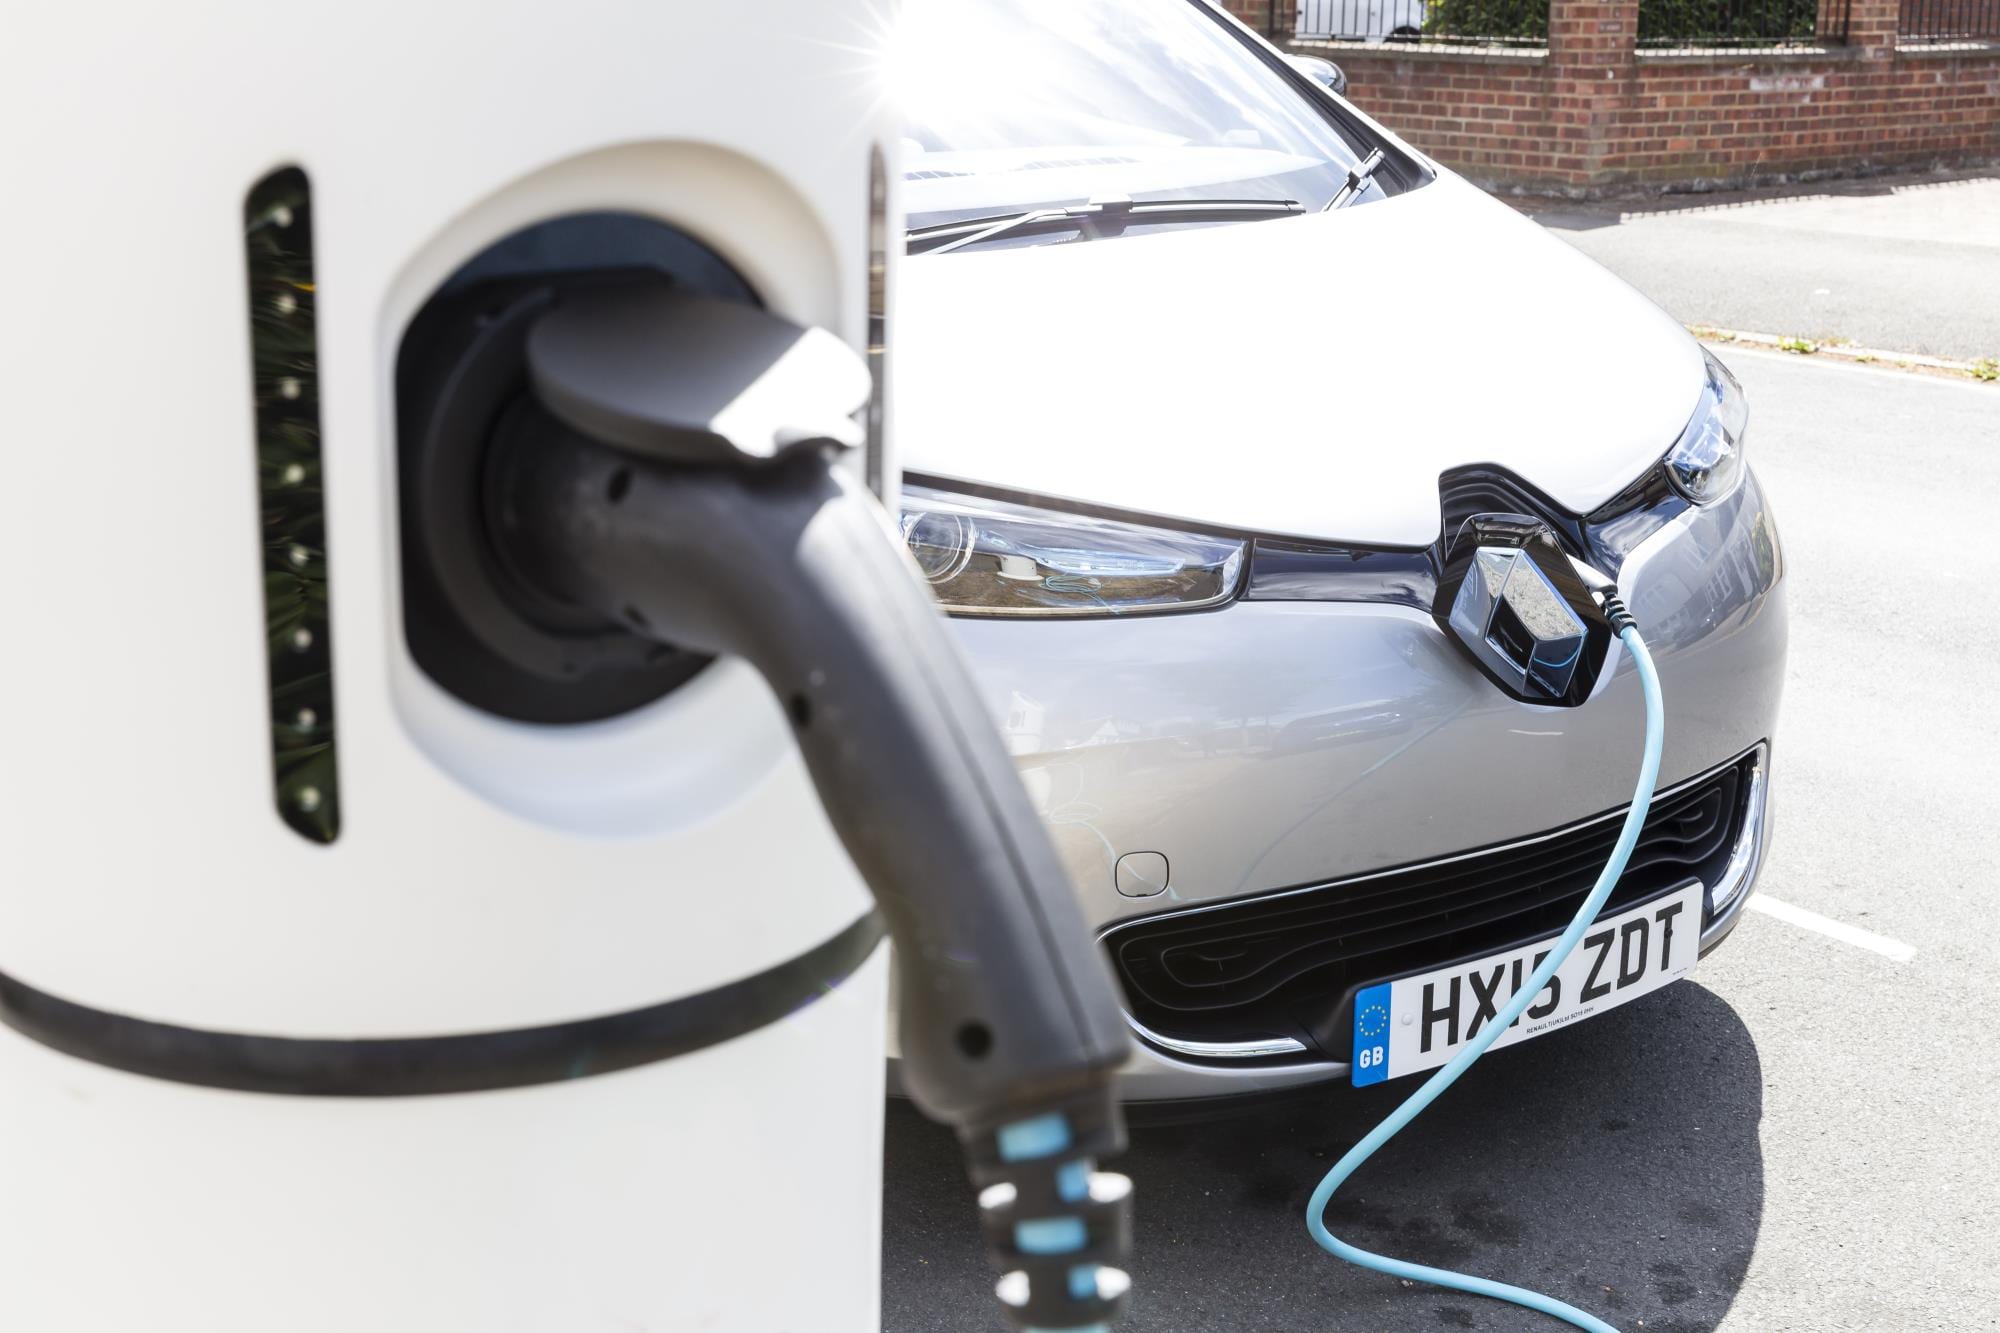 Charging electric vehicles can cost as much as diesel